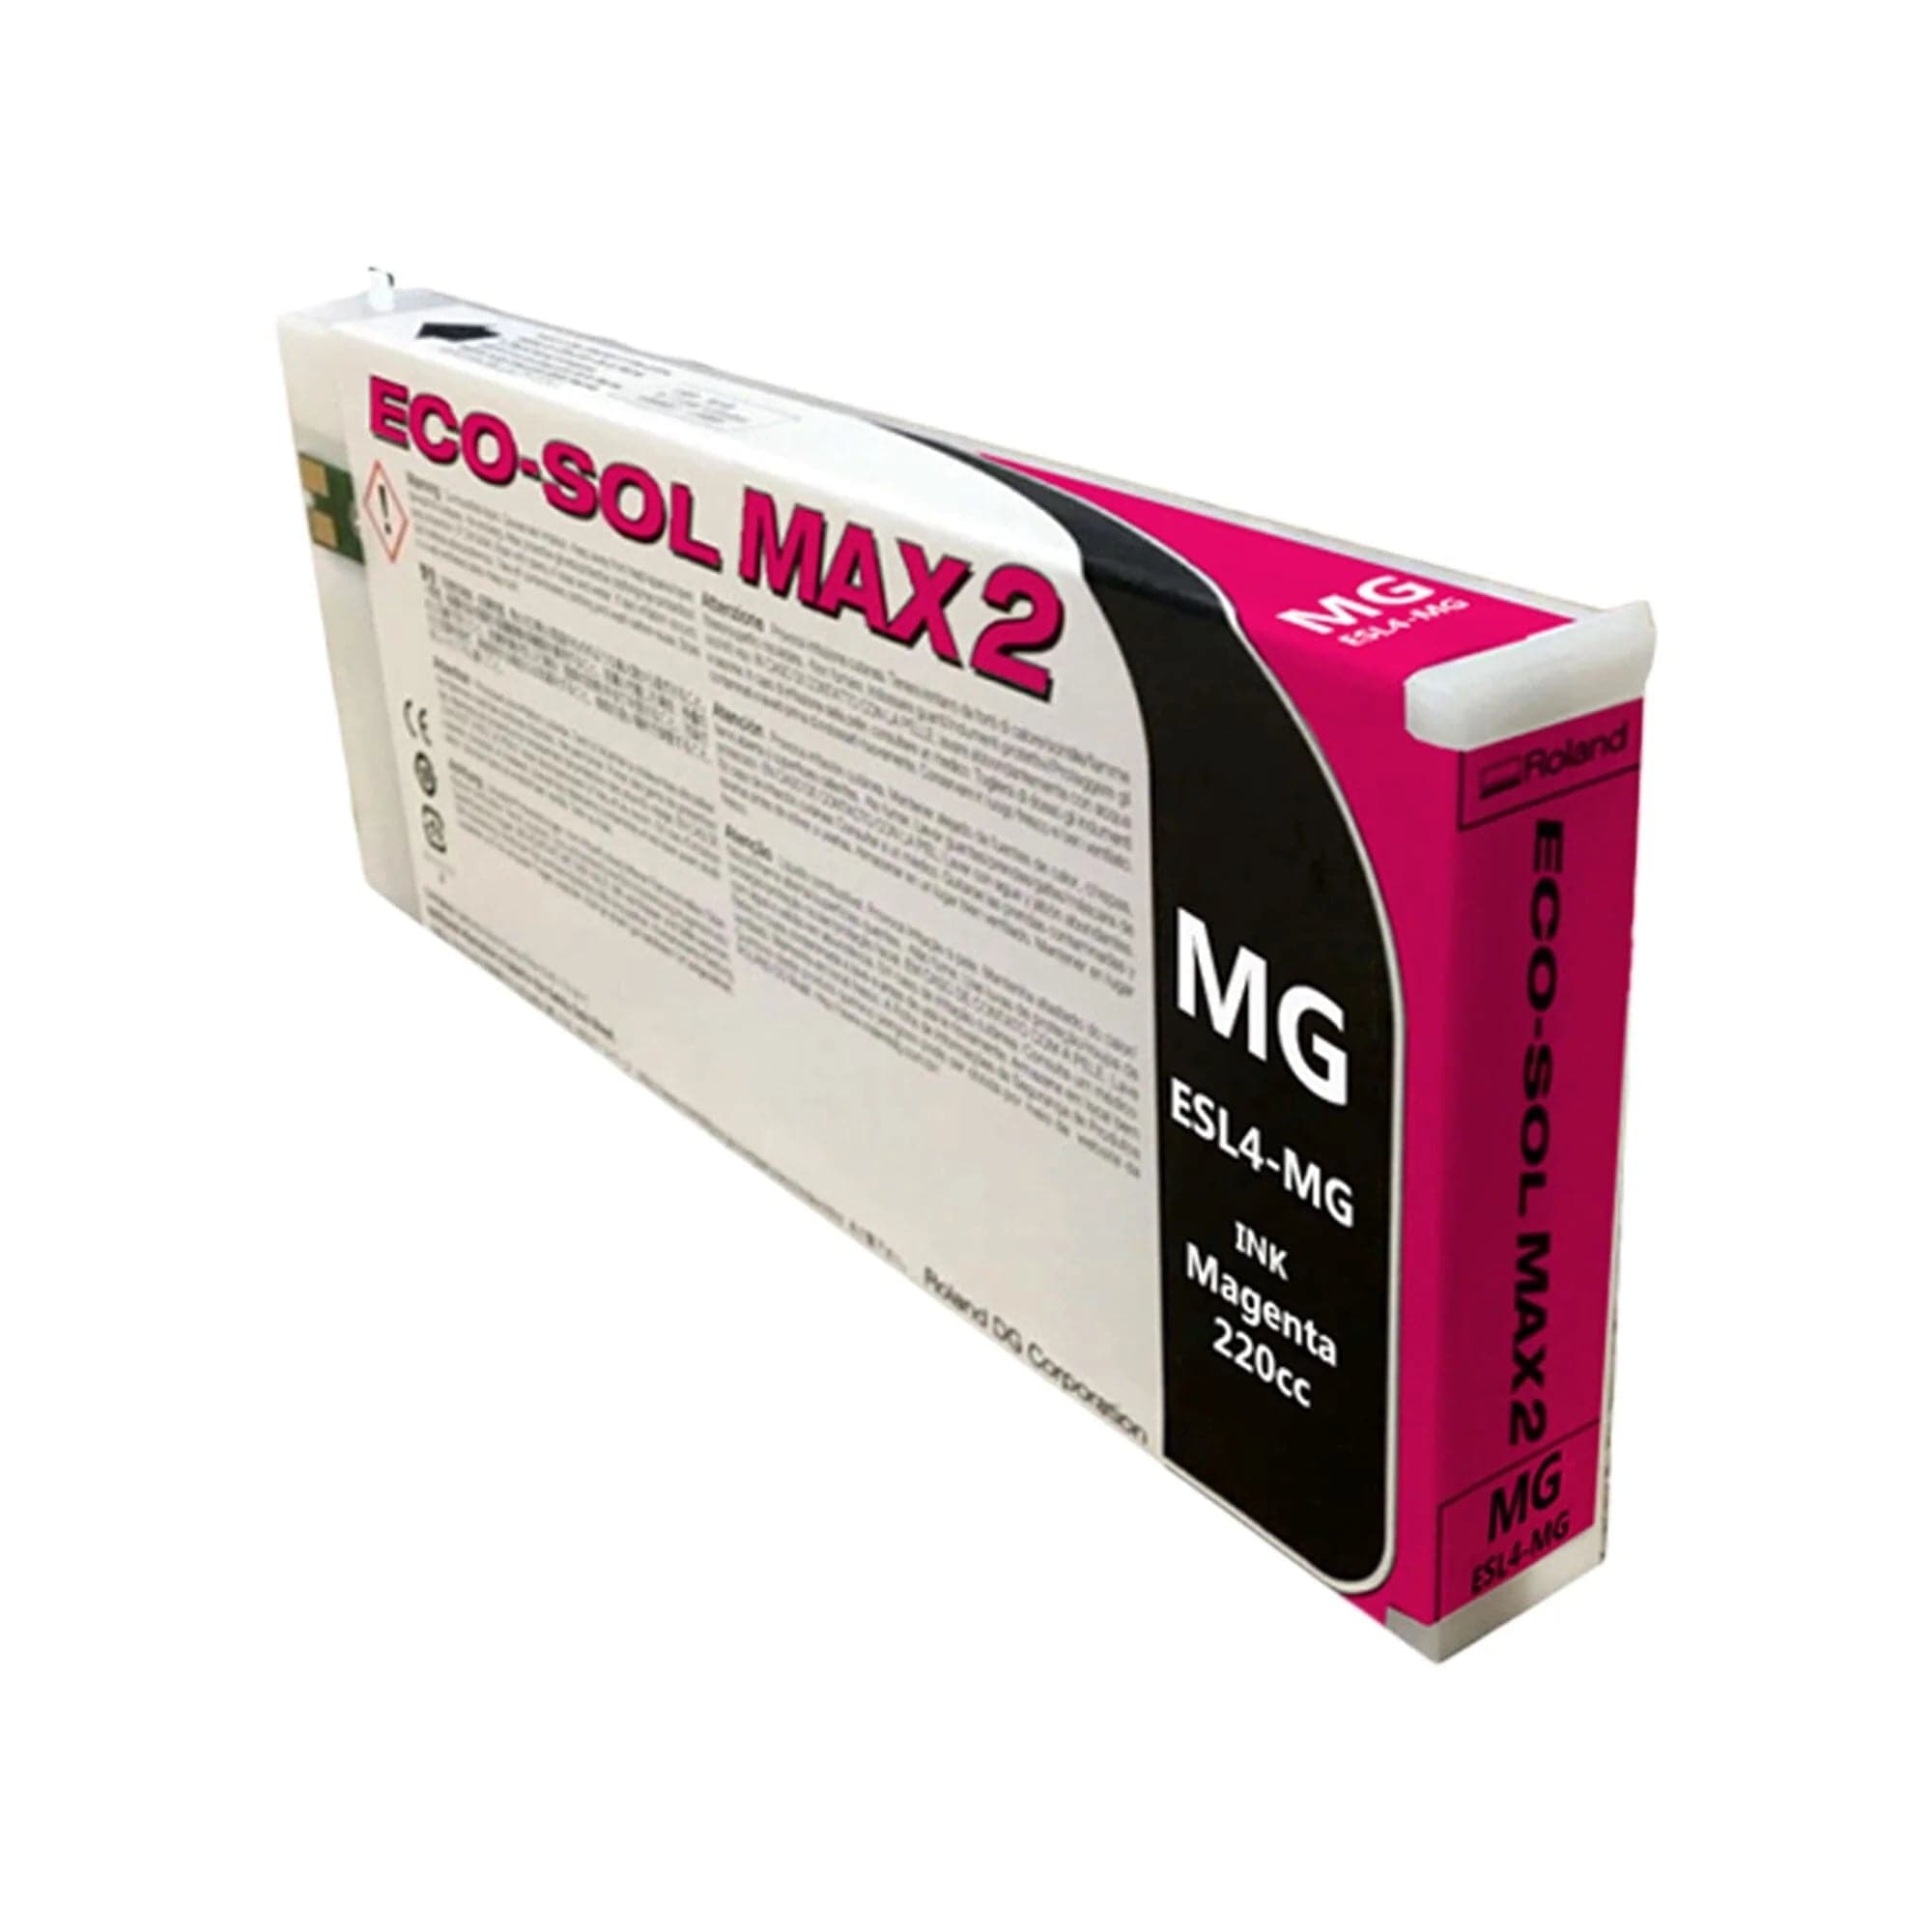 Roland Eco-Sol MAX 2 Ink Cartridge (for BN-20, BN-20A, BN2-20A) - Joto Imaging Supplies US